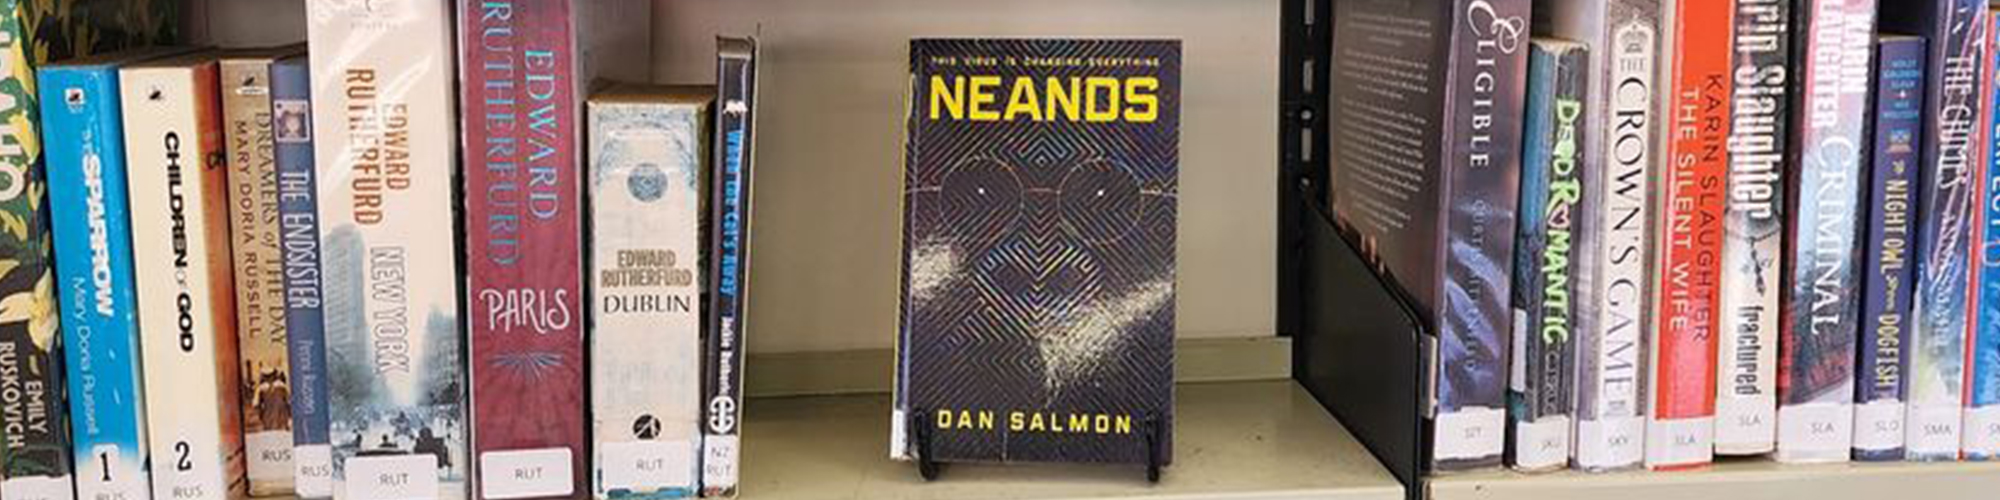 Neands by Dan Salmon